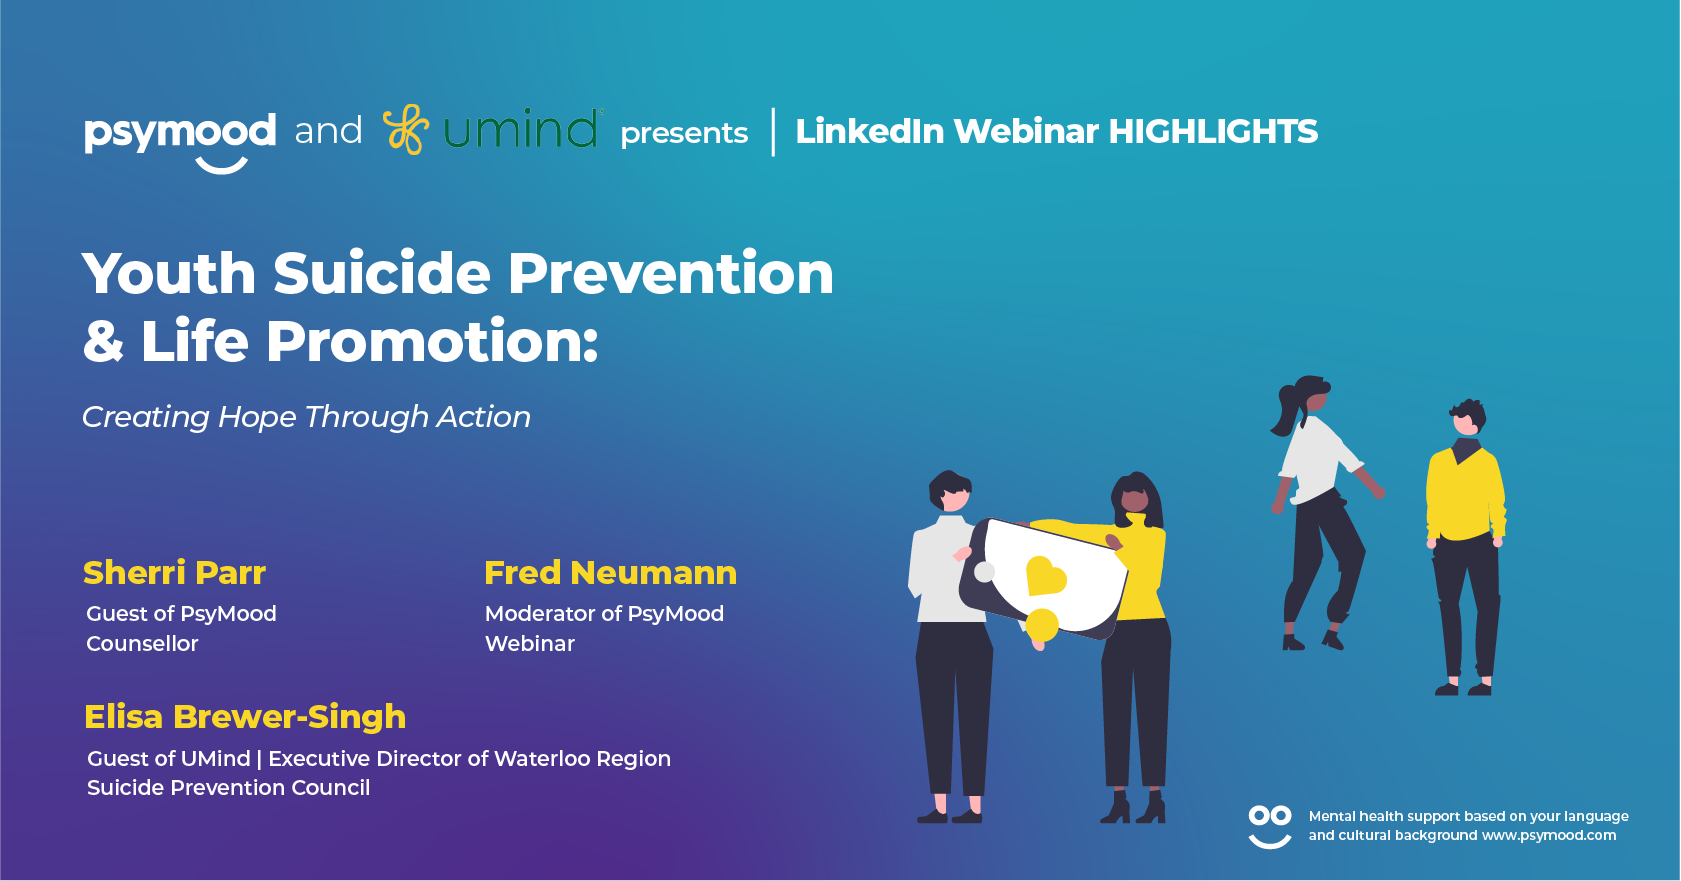 Youth Suicide Prevention & Life Promotion: Creating Hope Through Action – Session Highlights